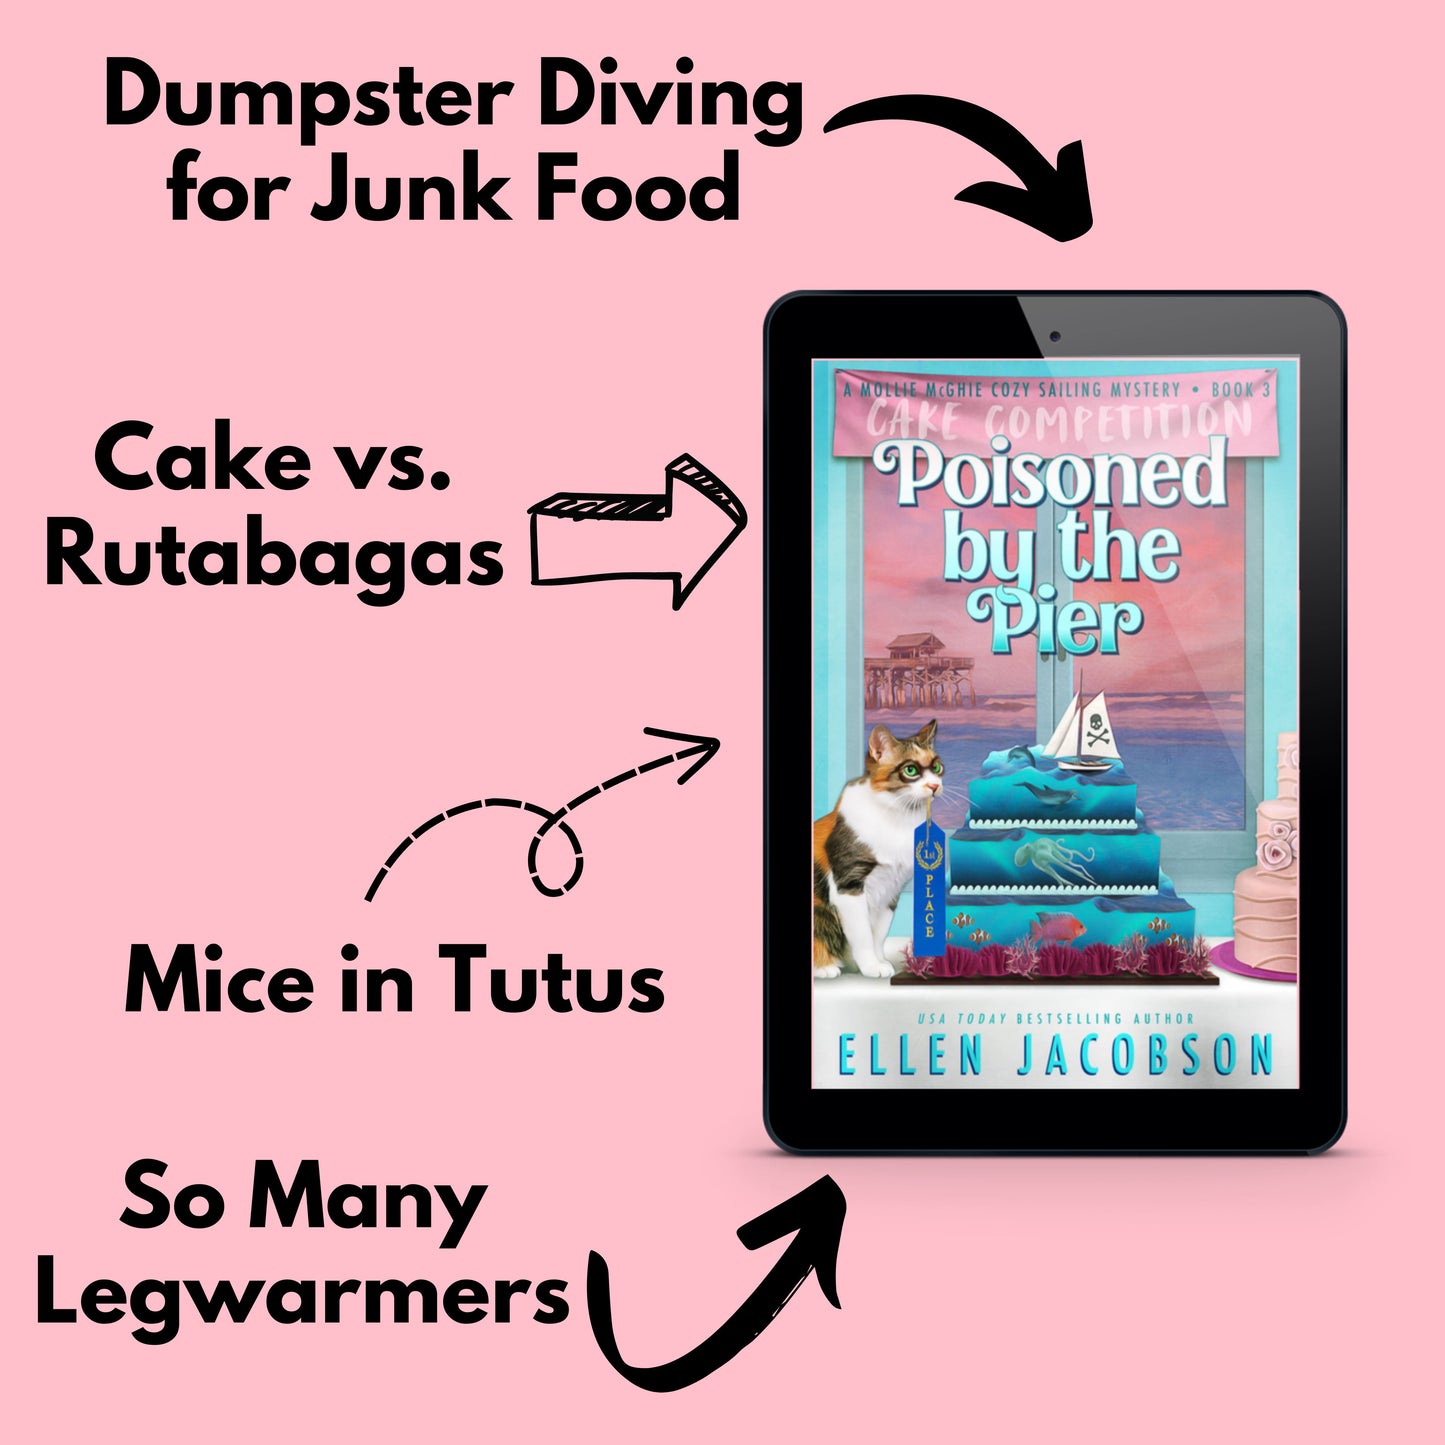 Poisoned by the Pier (Mollie McGhie Cozy Mystery #3) ebook cover with text that says dumpster diving for junk food, cake versus rutabagas, mice in tuts, and so many legwarmers